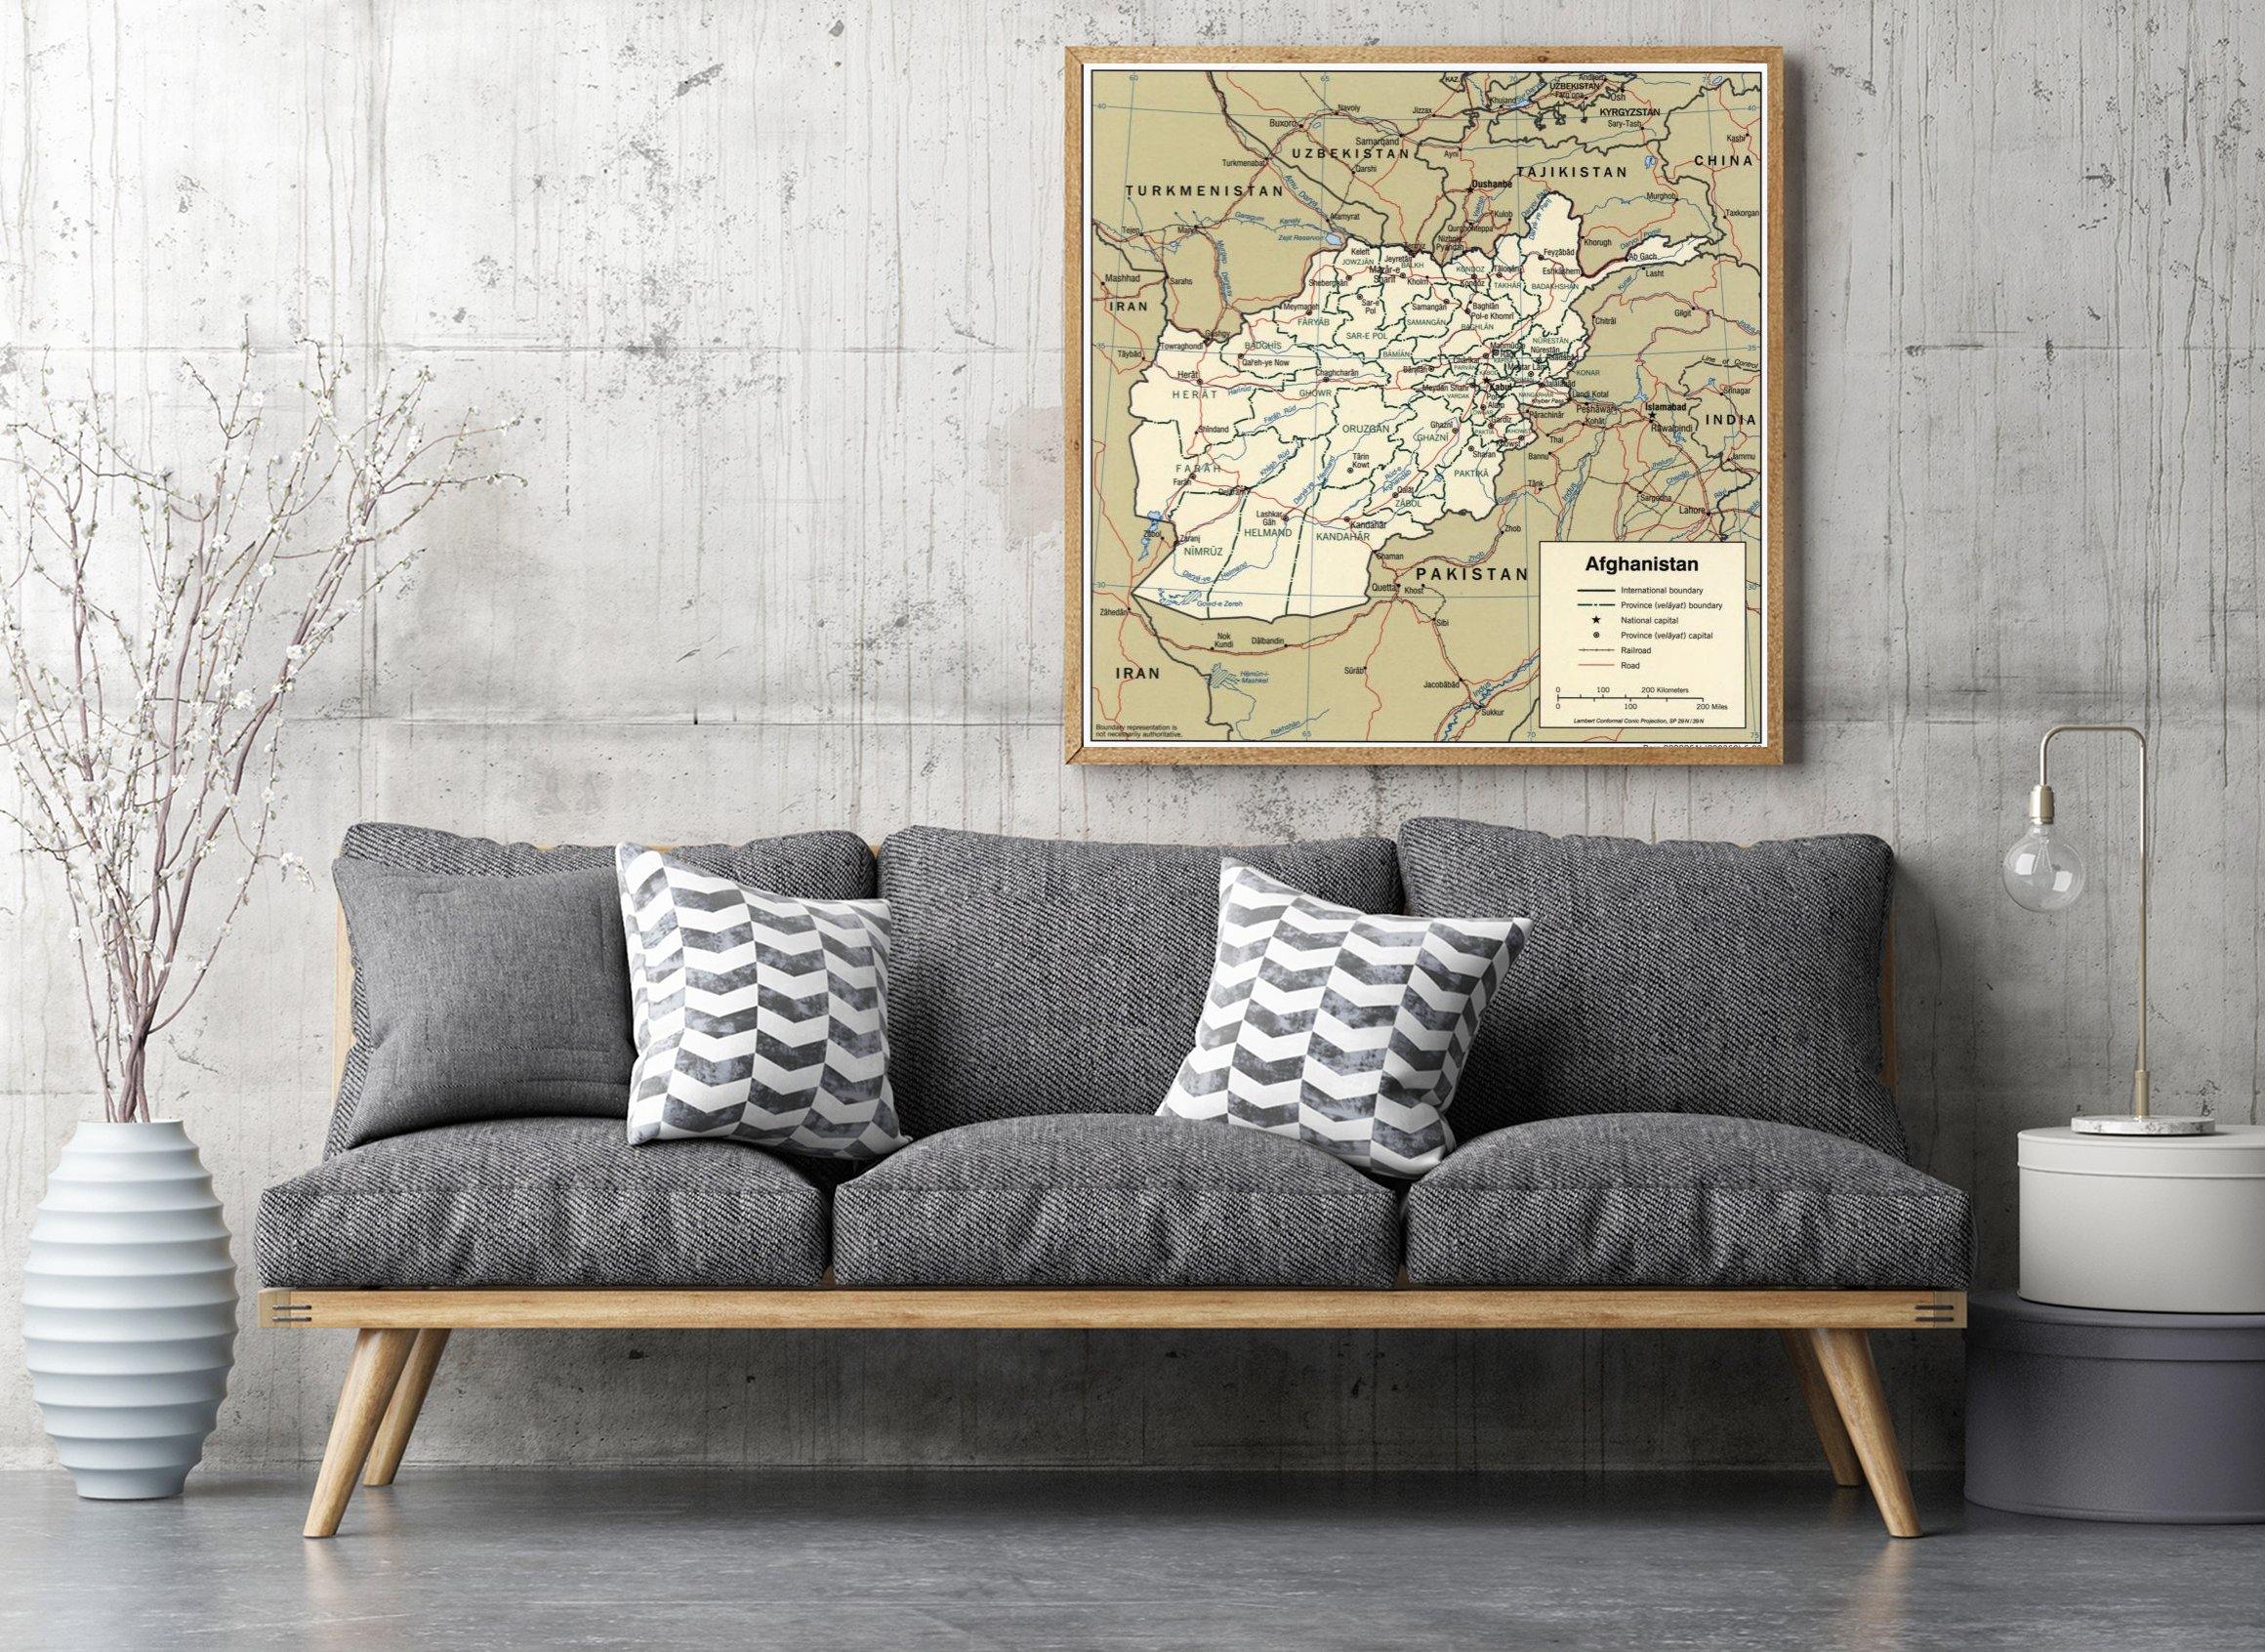 2003 Map| Afghanistan| Afghanistan Map Size: 24 inches x 24 inches |Fi - New York Map Company